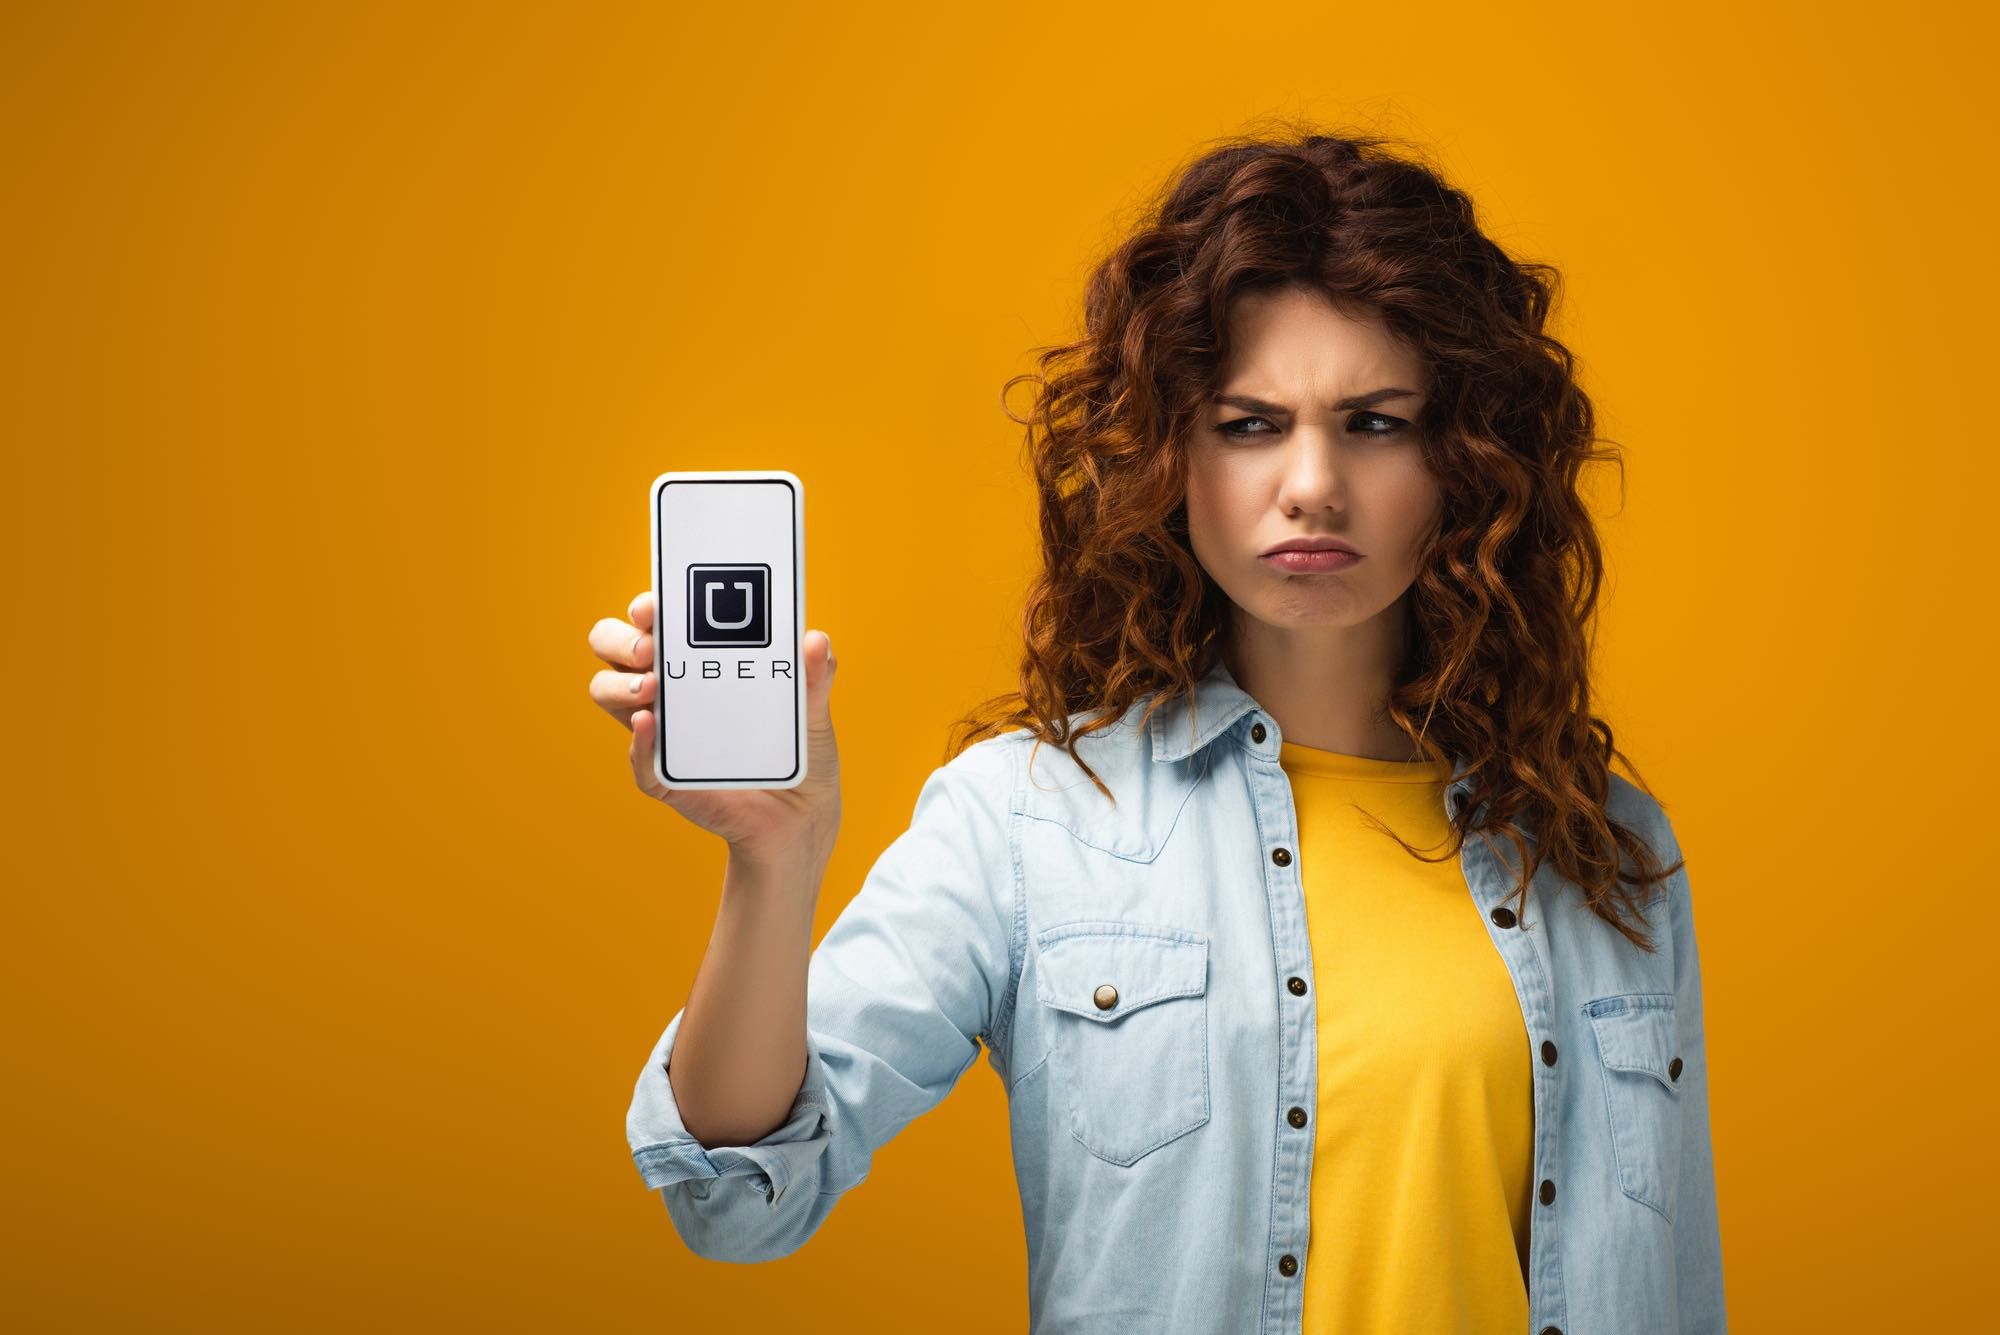 Girl holding Uber app on phone and looking man